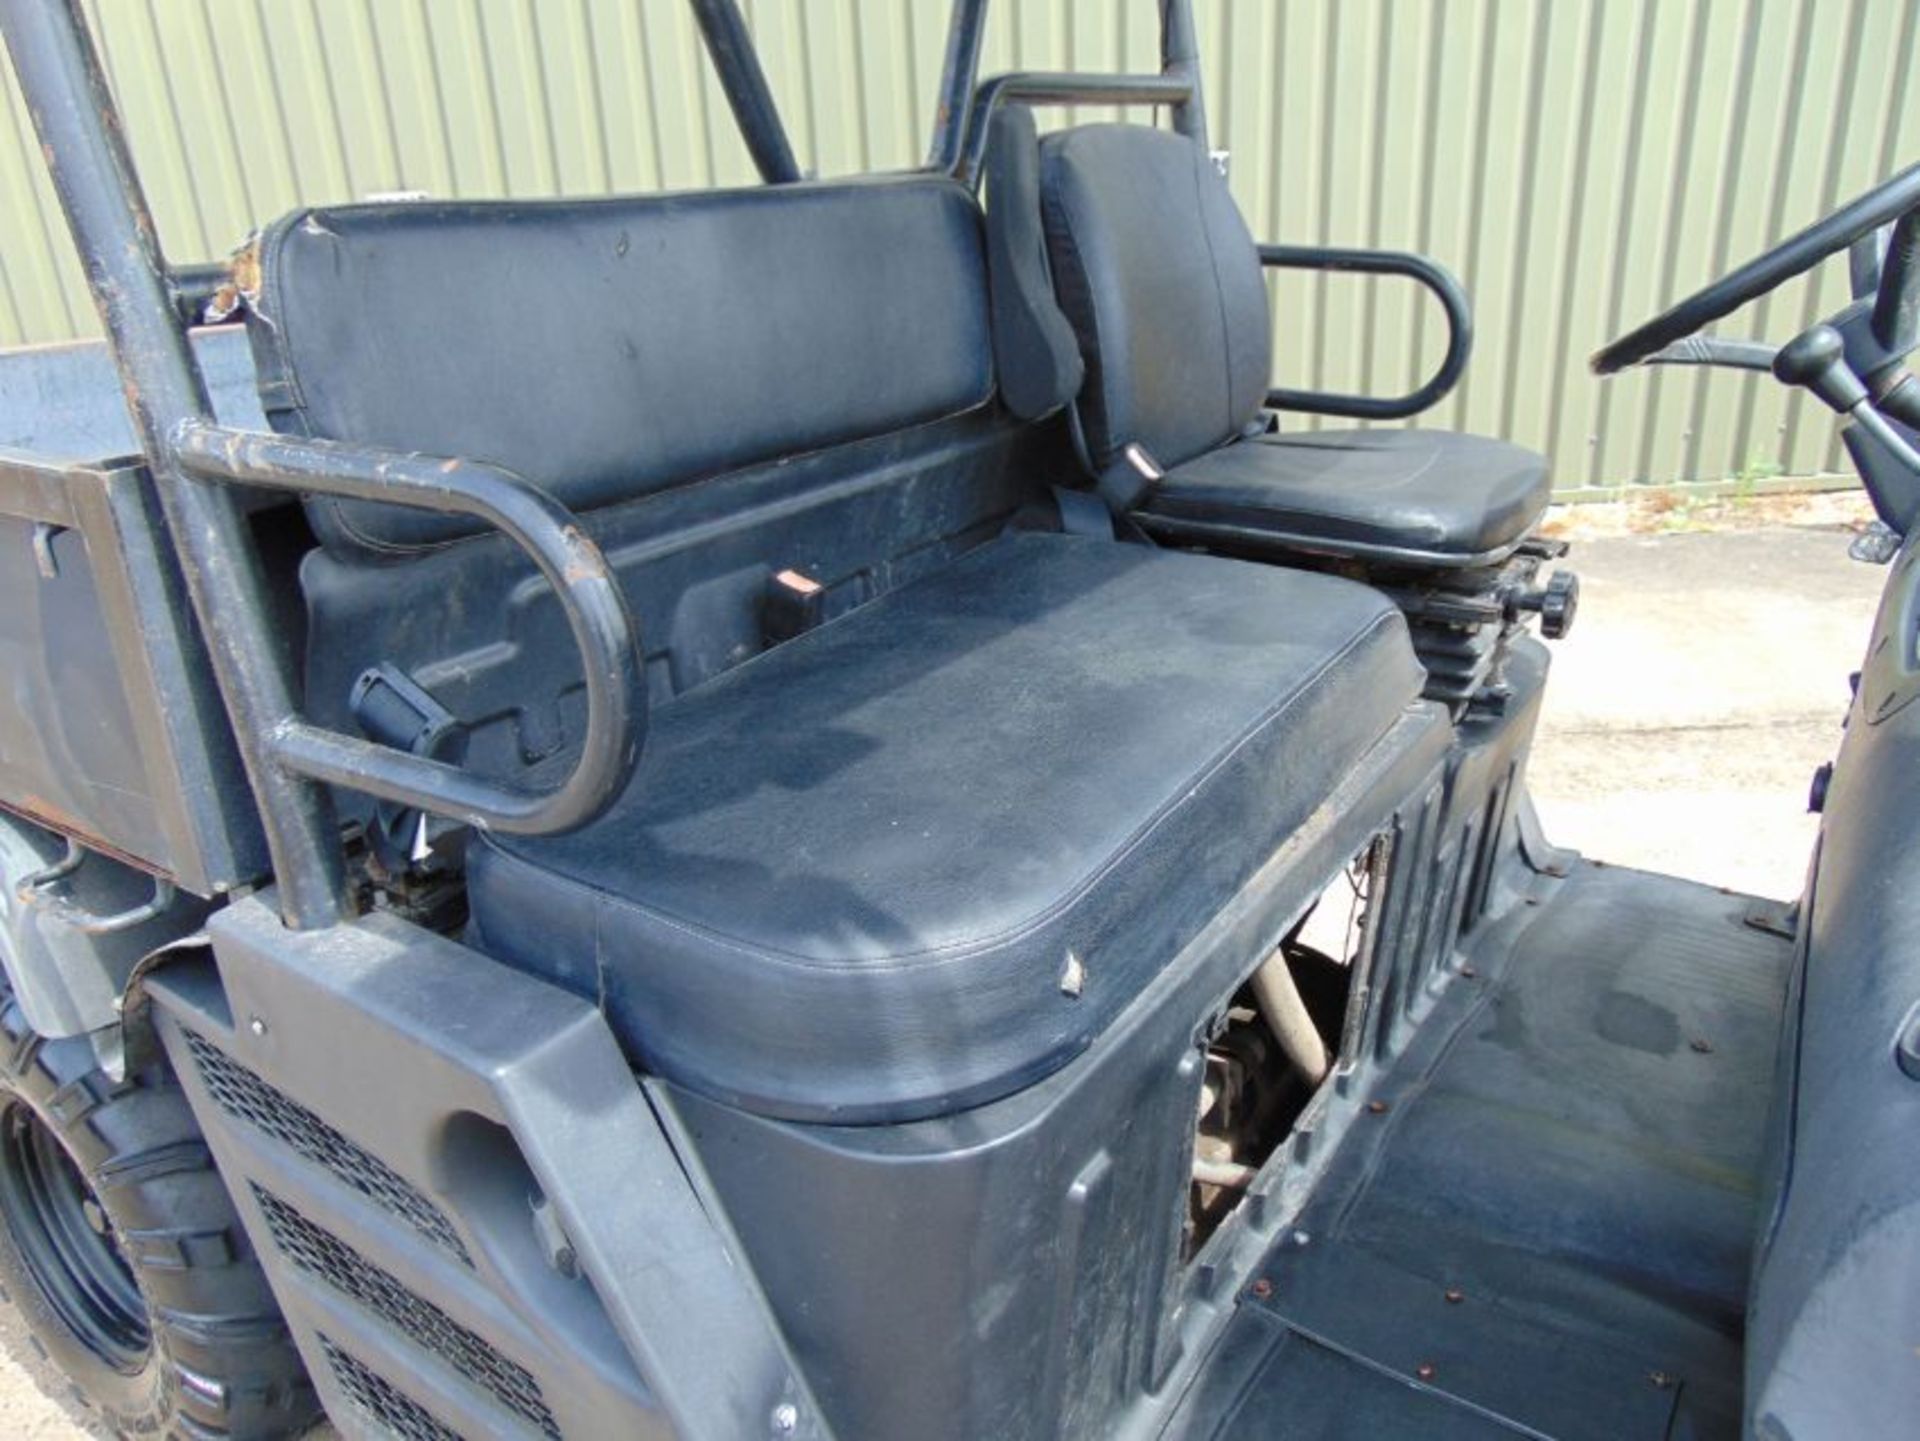 2014 Cushman XD1600 4x4 Diesel Utility Vehicle Showing 1333 hrs - Image 15 of 19